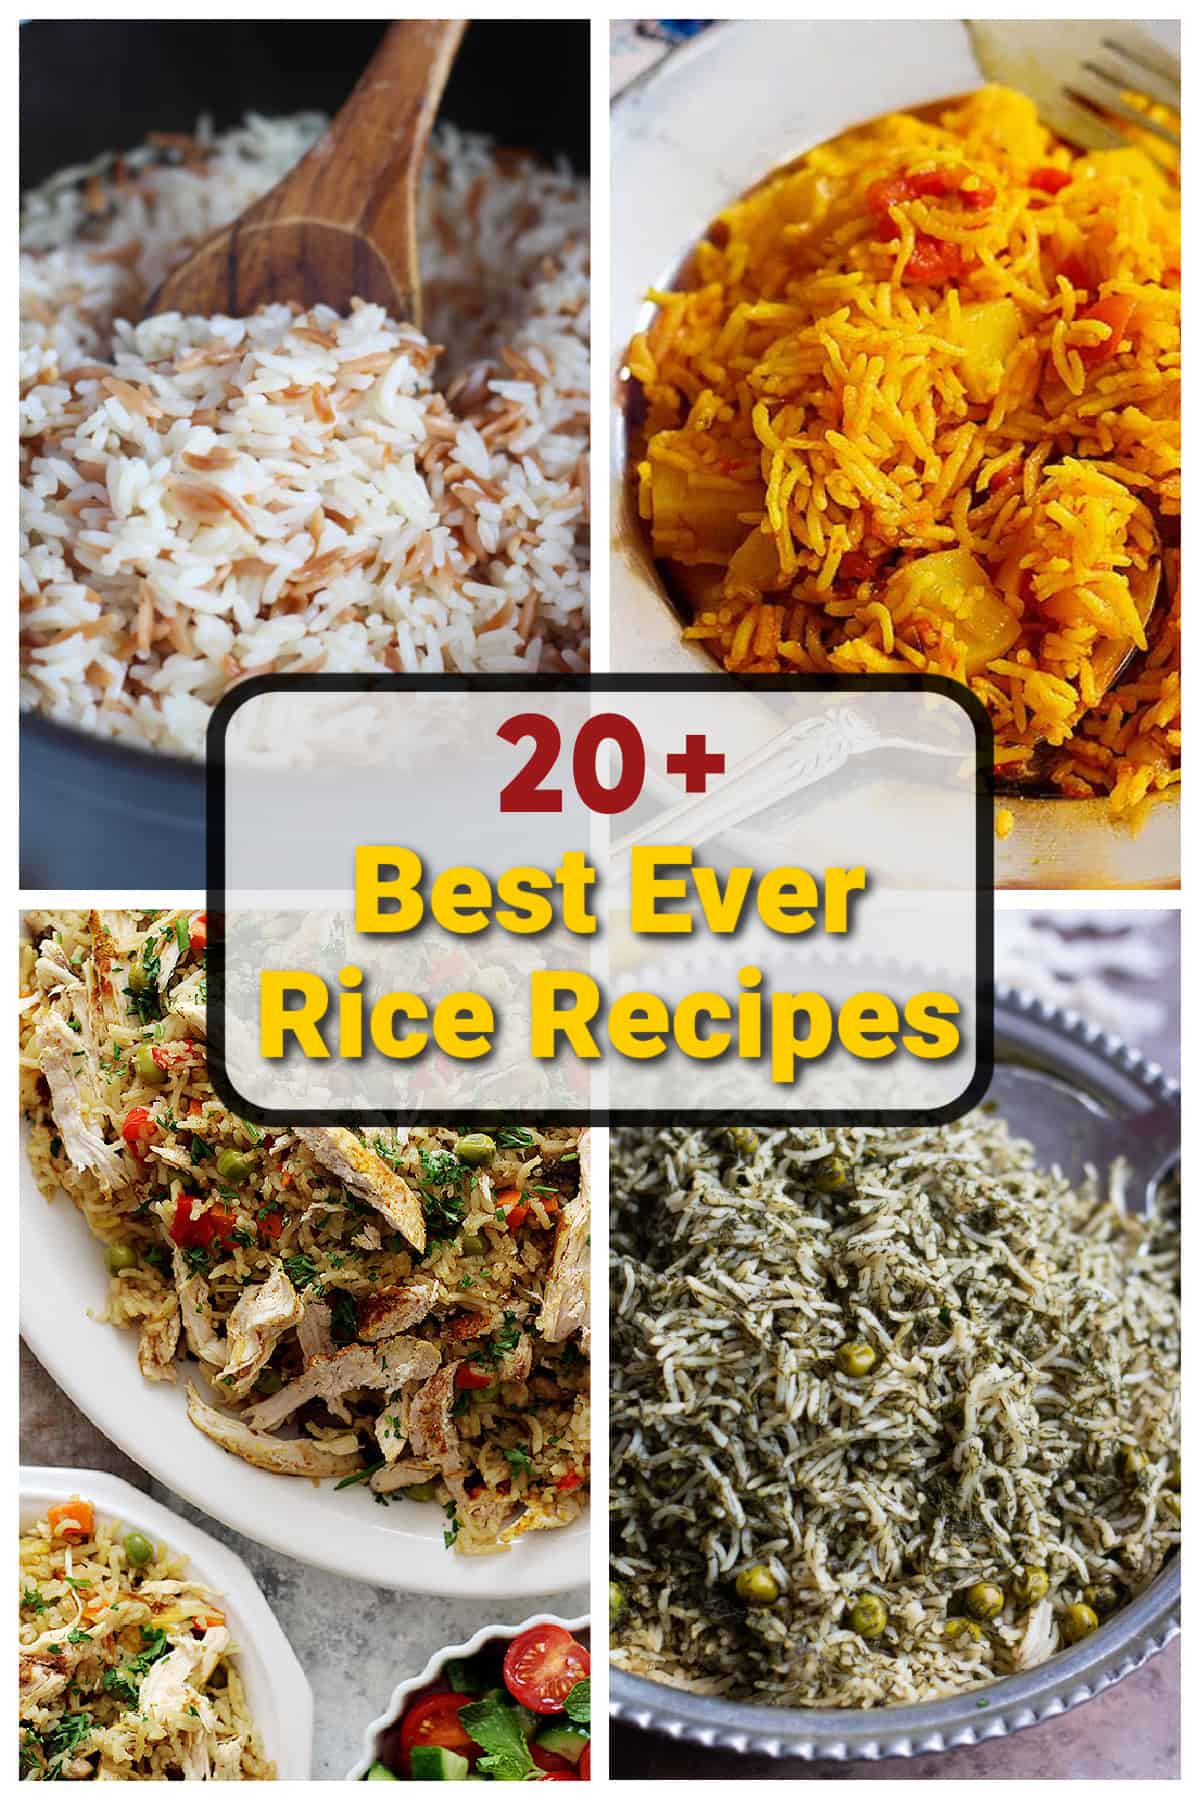 Check out our favorite rice recipes that are perfect for any day of the week. We cover the basics such as white rice and brown rice but also have weeknight inspirations such as one pan rice and chicken recipes and many side dishes to choose from!